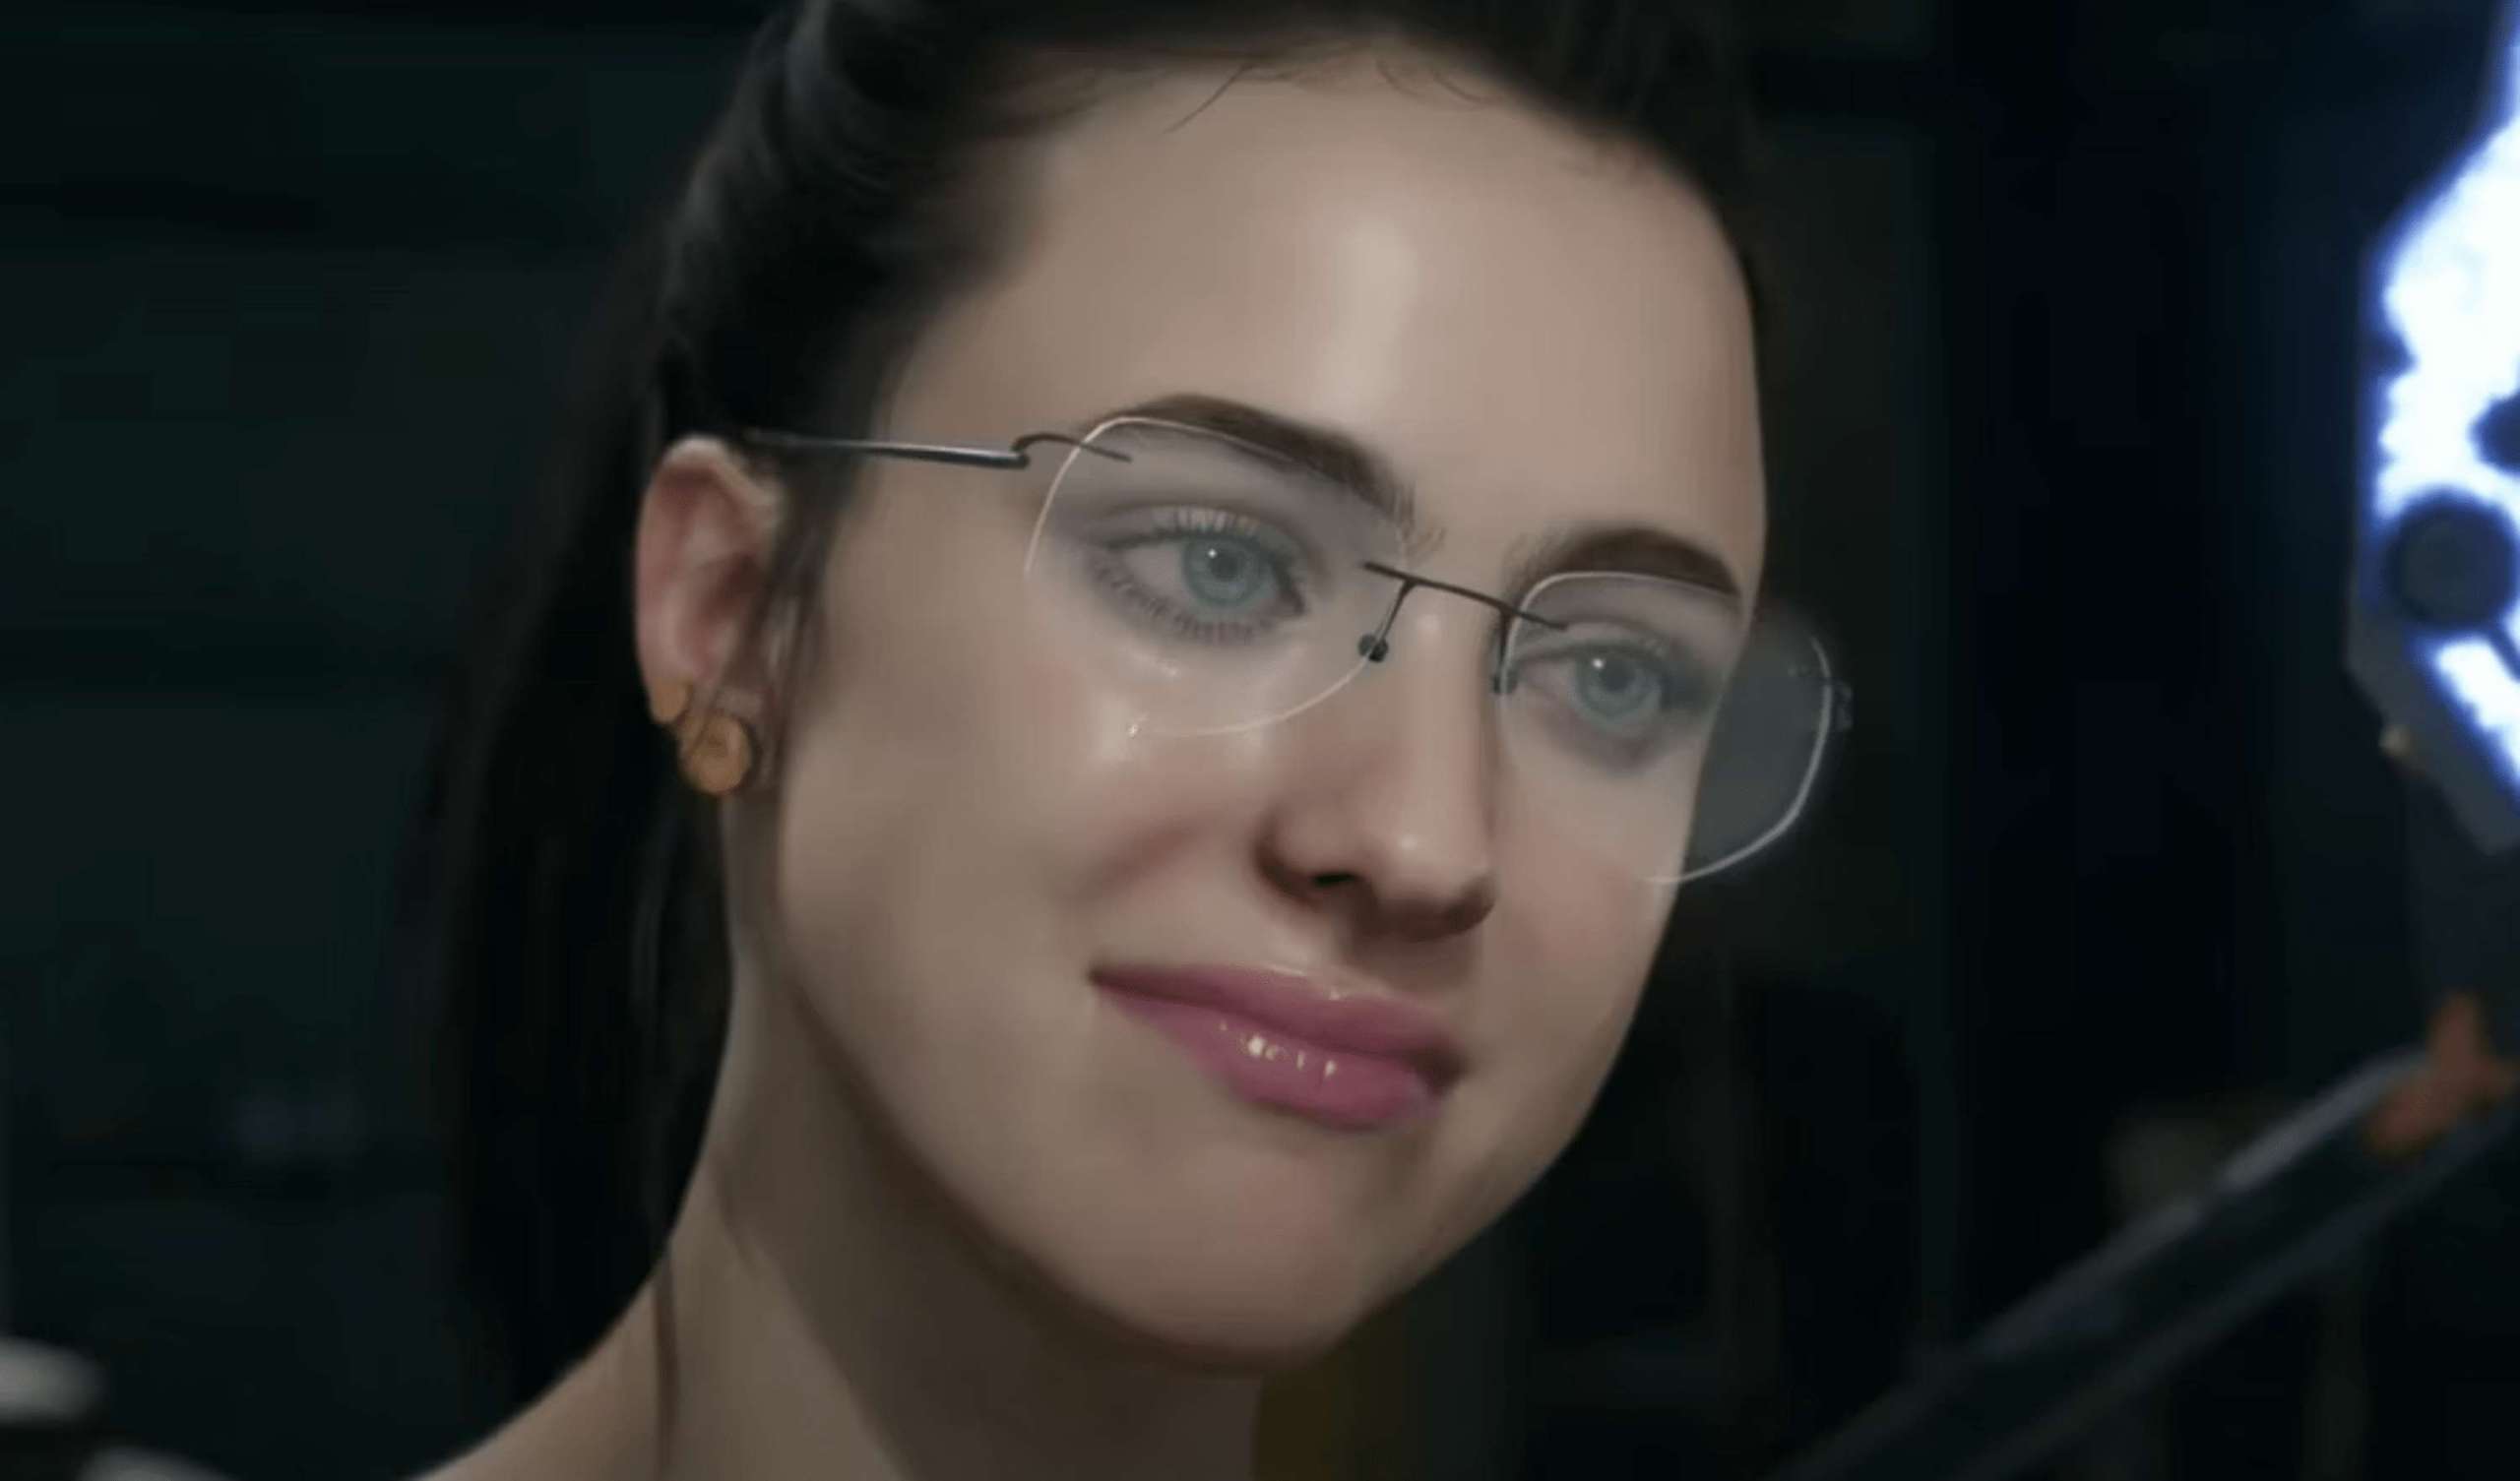 Margaret Qualley Appears To Be The Focus Of Kojima’s Latest Teaser, Suggesting She Will Appear In His Next Game